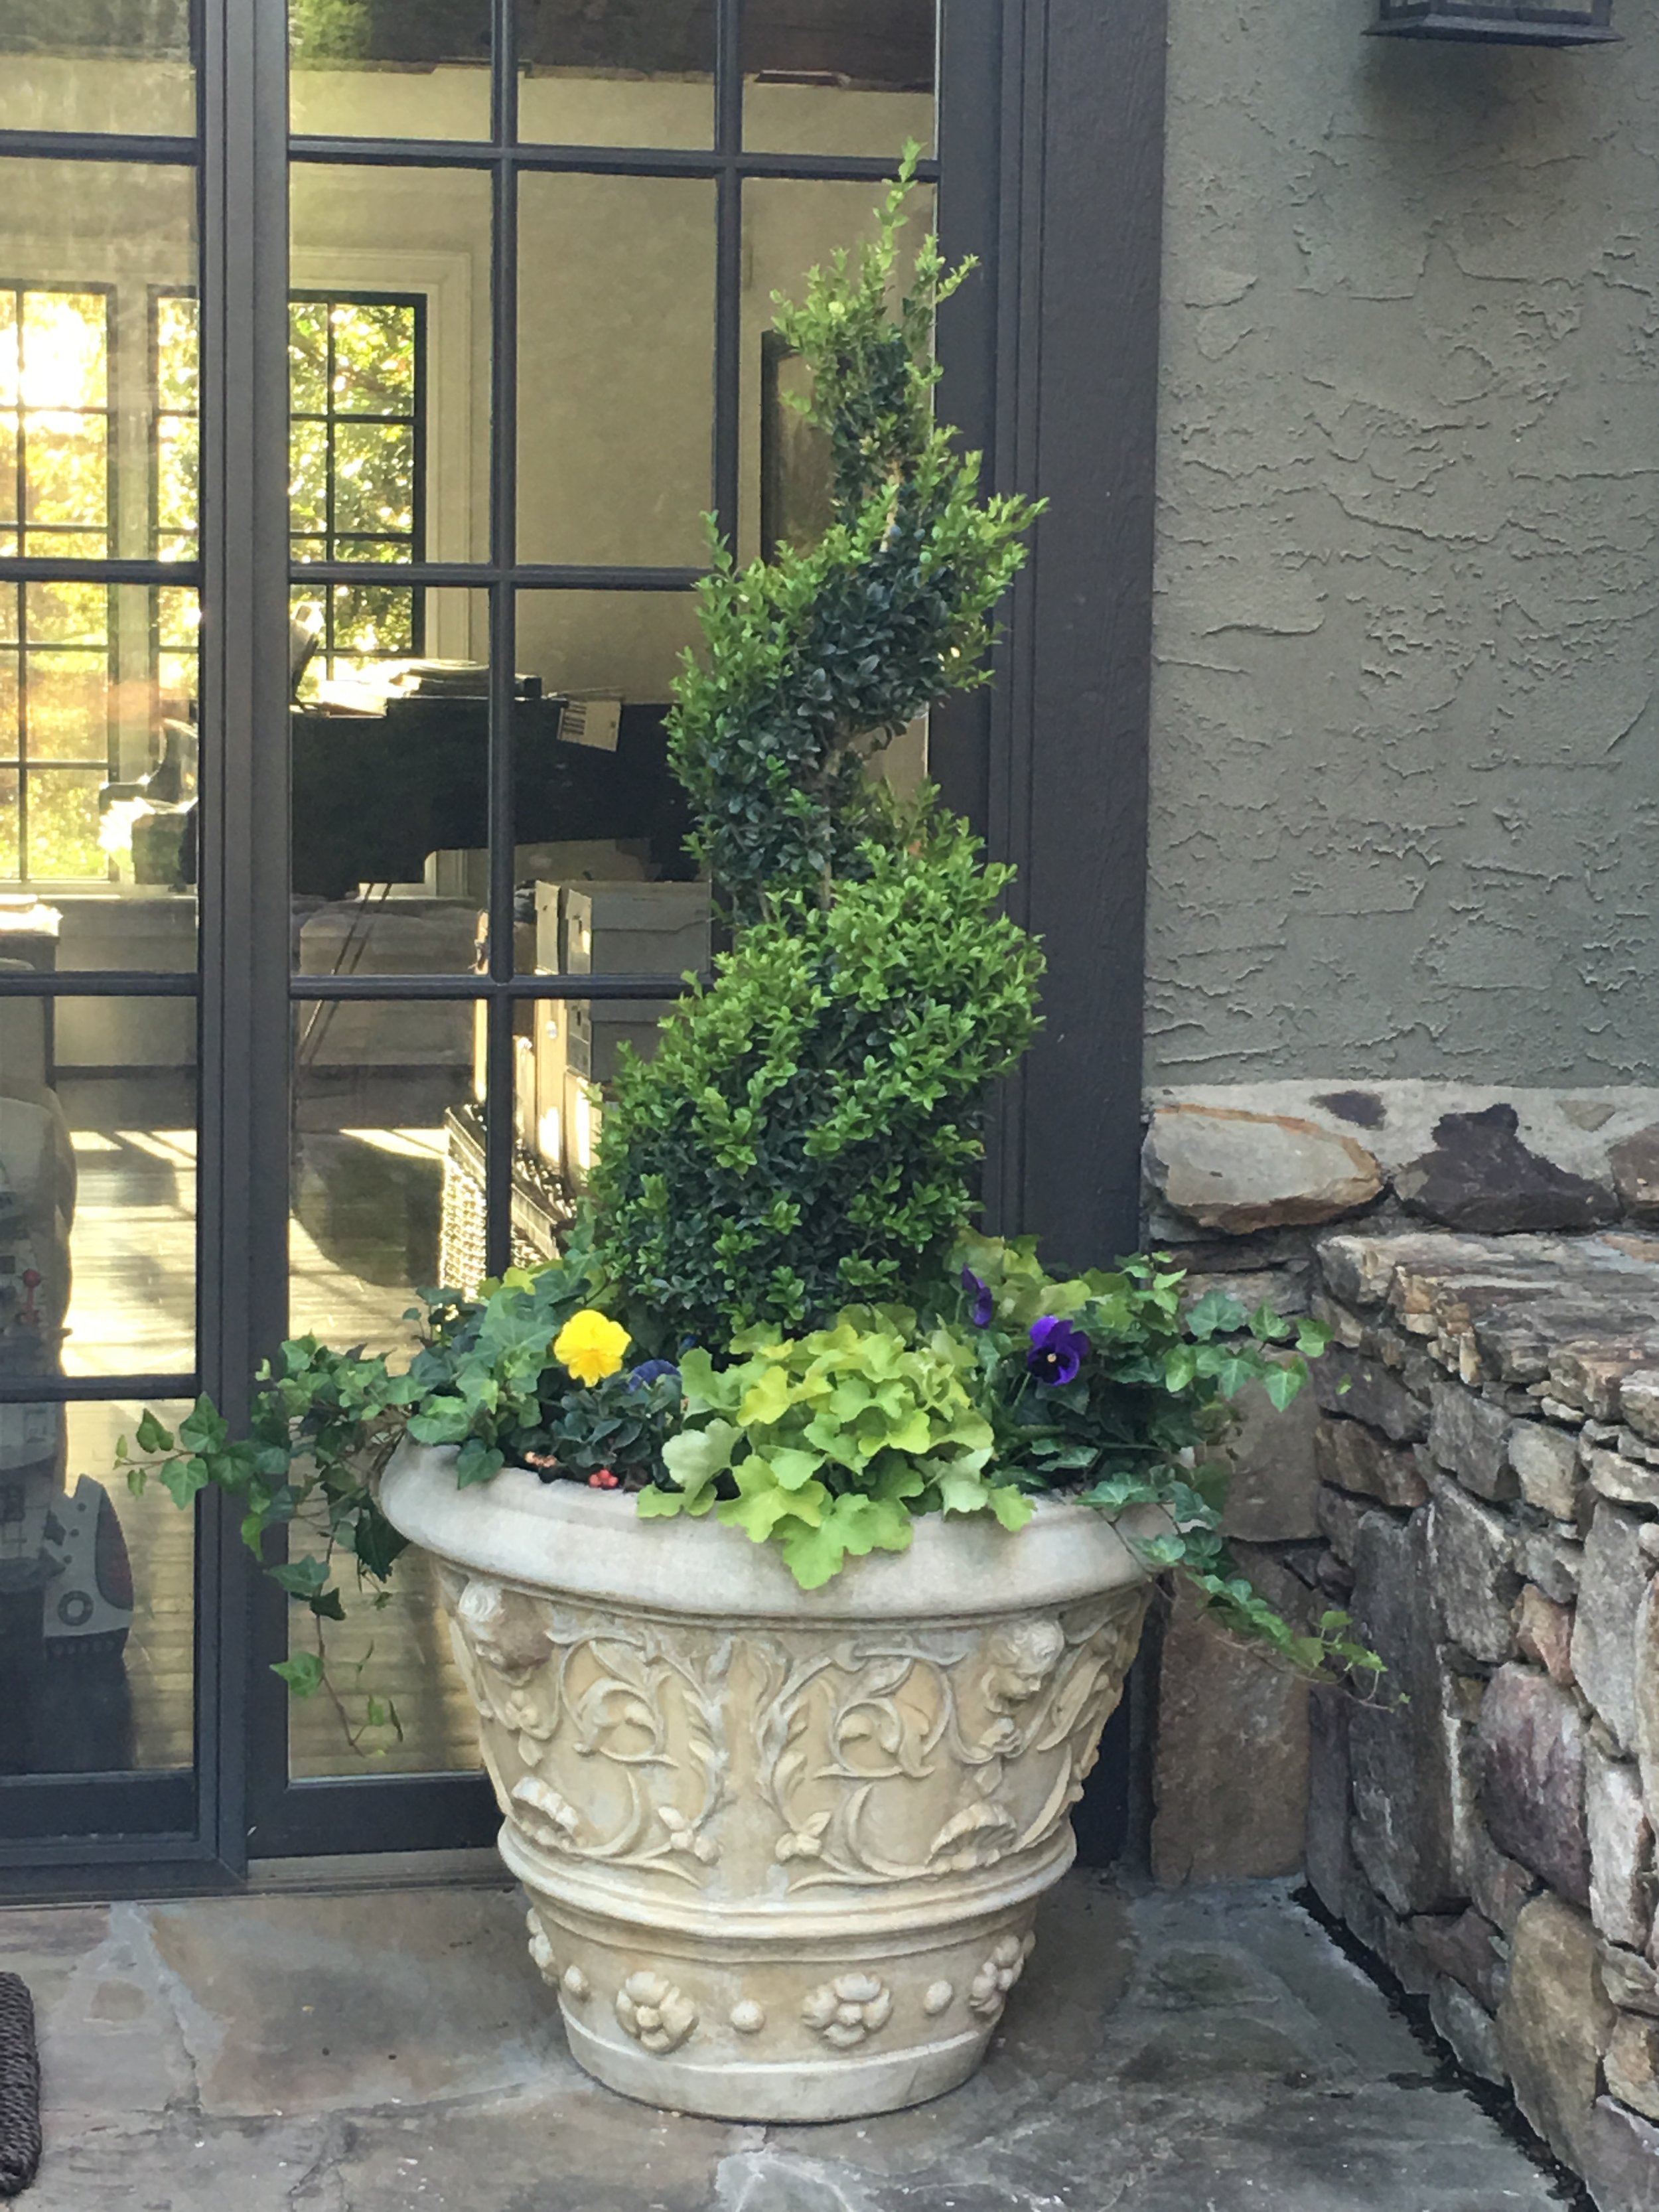 A winter garden in a concrete container. Concrete pots can stay out all winter, and look best if you plant them. In this pot are evergreen boxwoods, evergreen 'Cintronelle' heuchera and evergreen ivy. The pansies will die back but show again in spring.